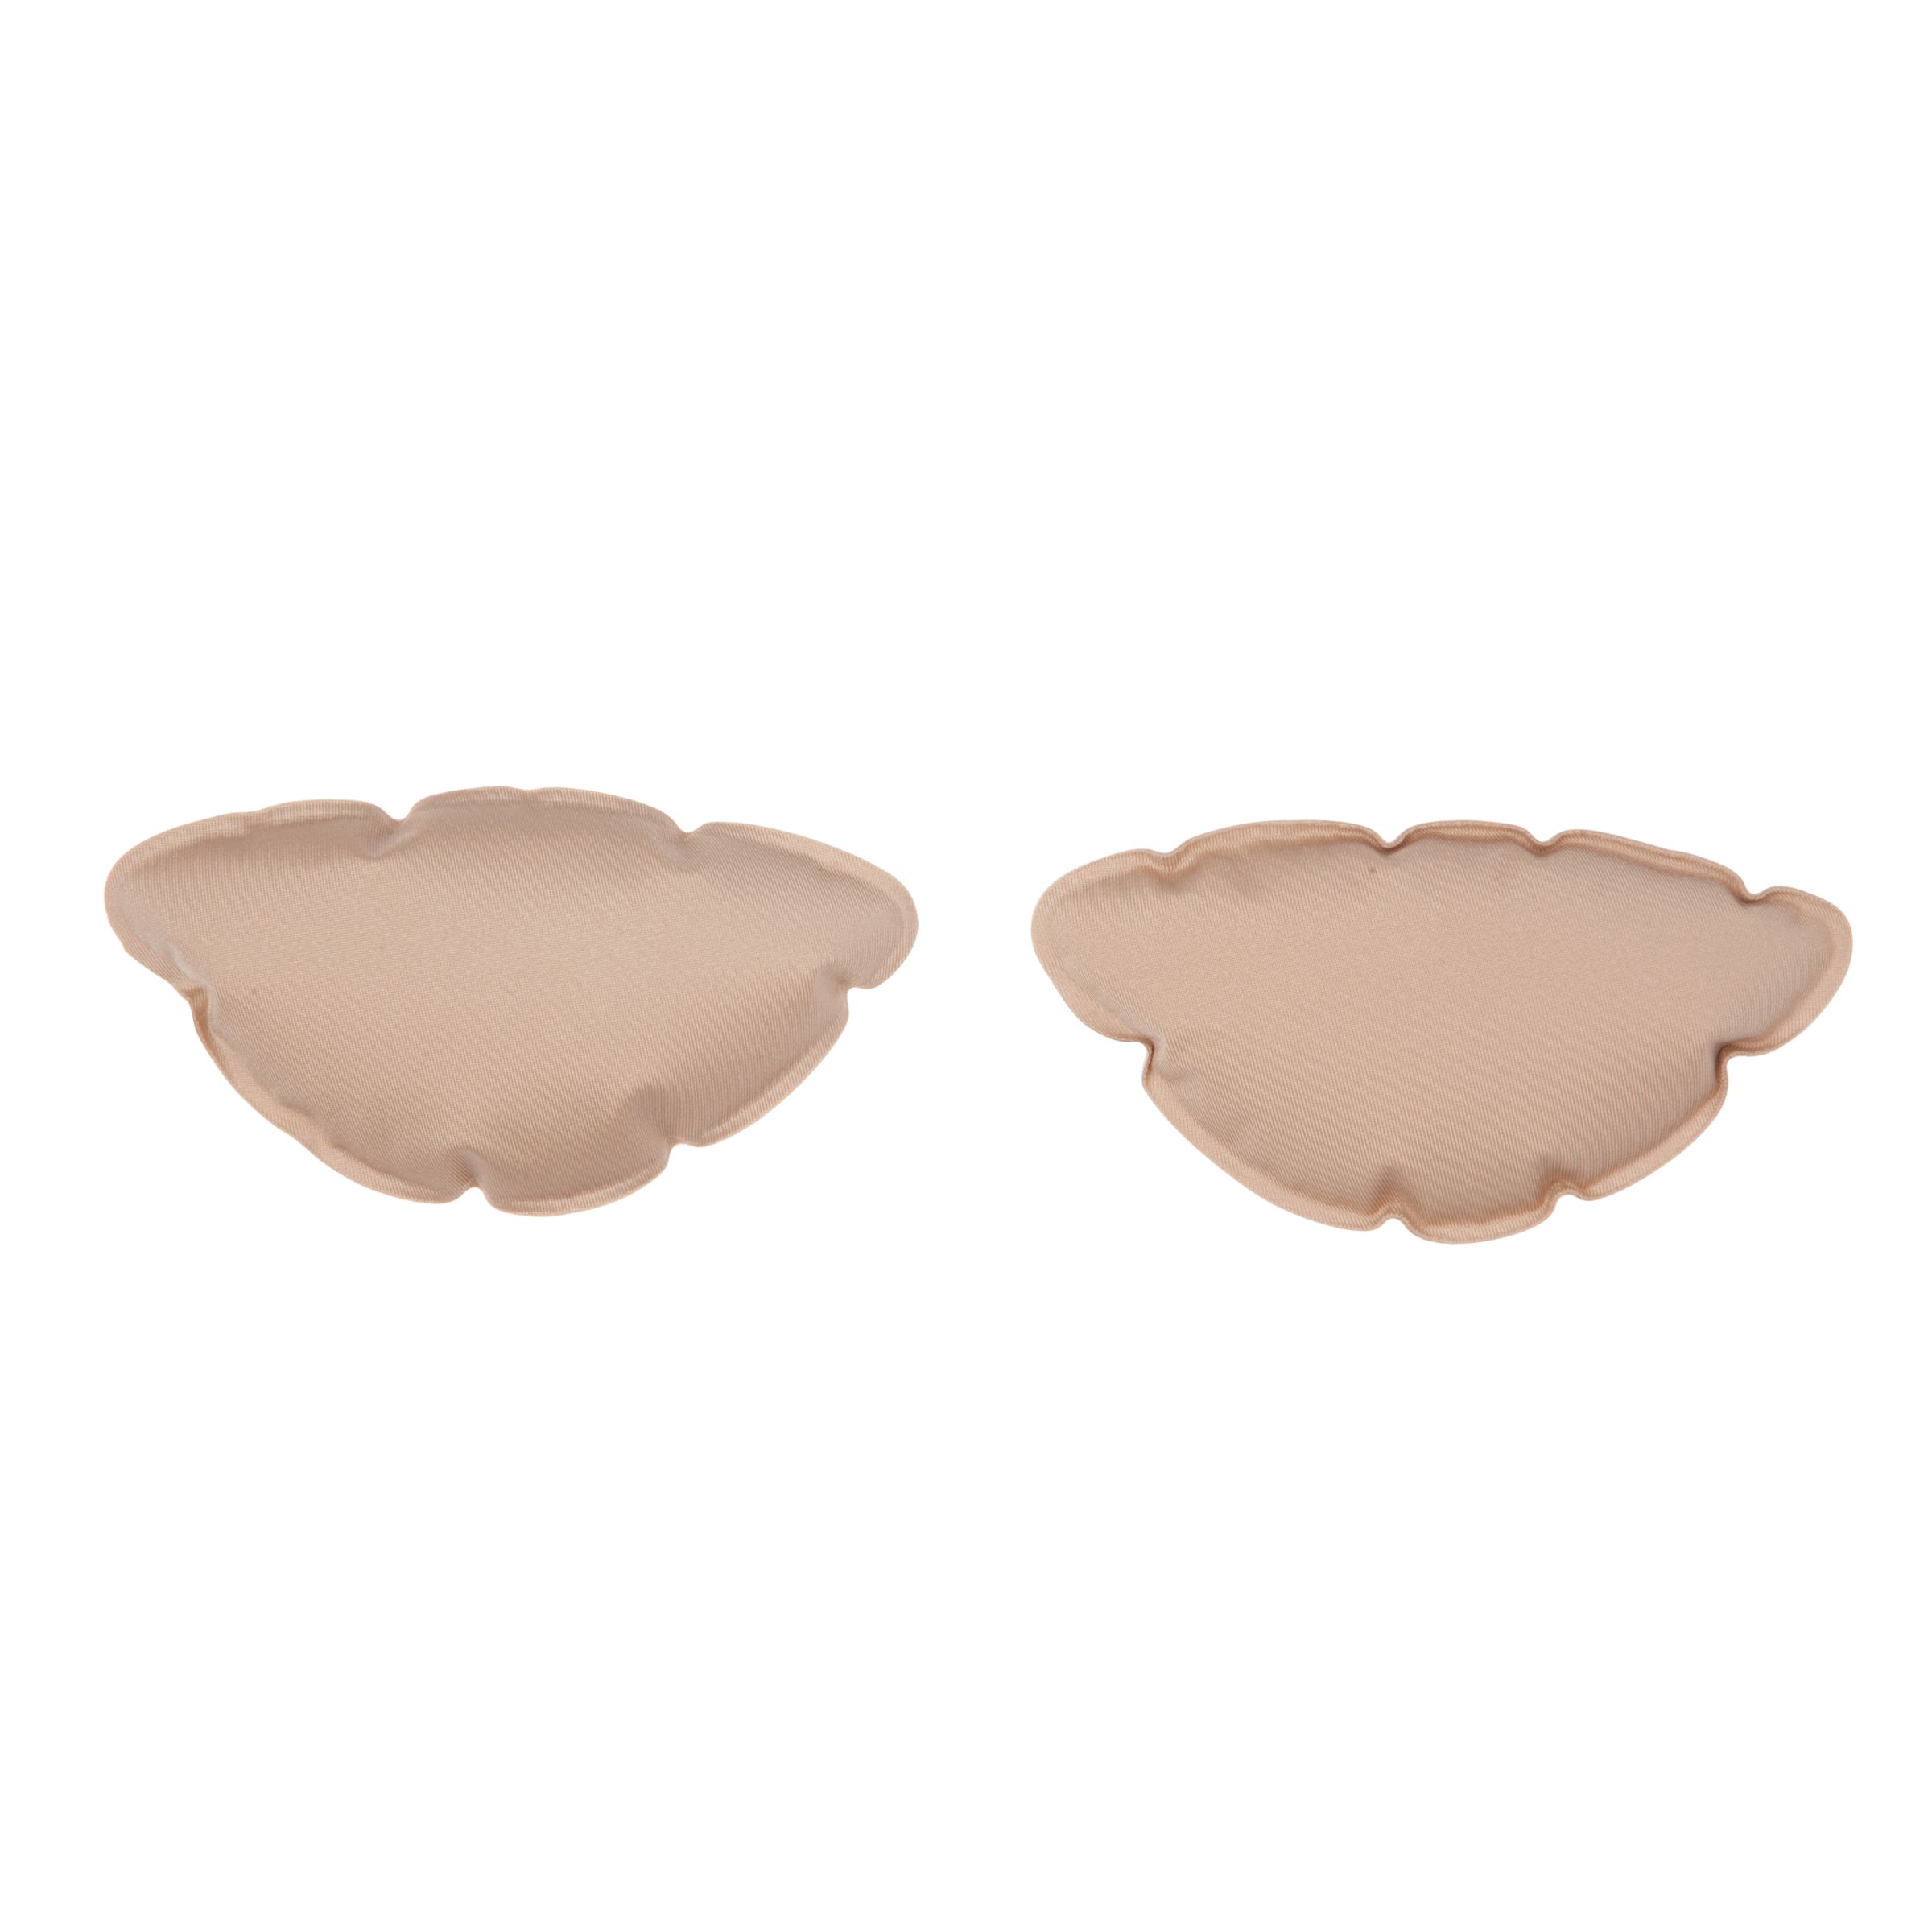 Buy John Lewis Lightweight Cleavage Booster, Almond Online at johnlewis.com